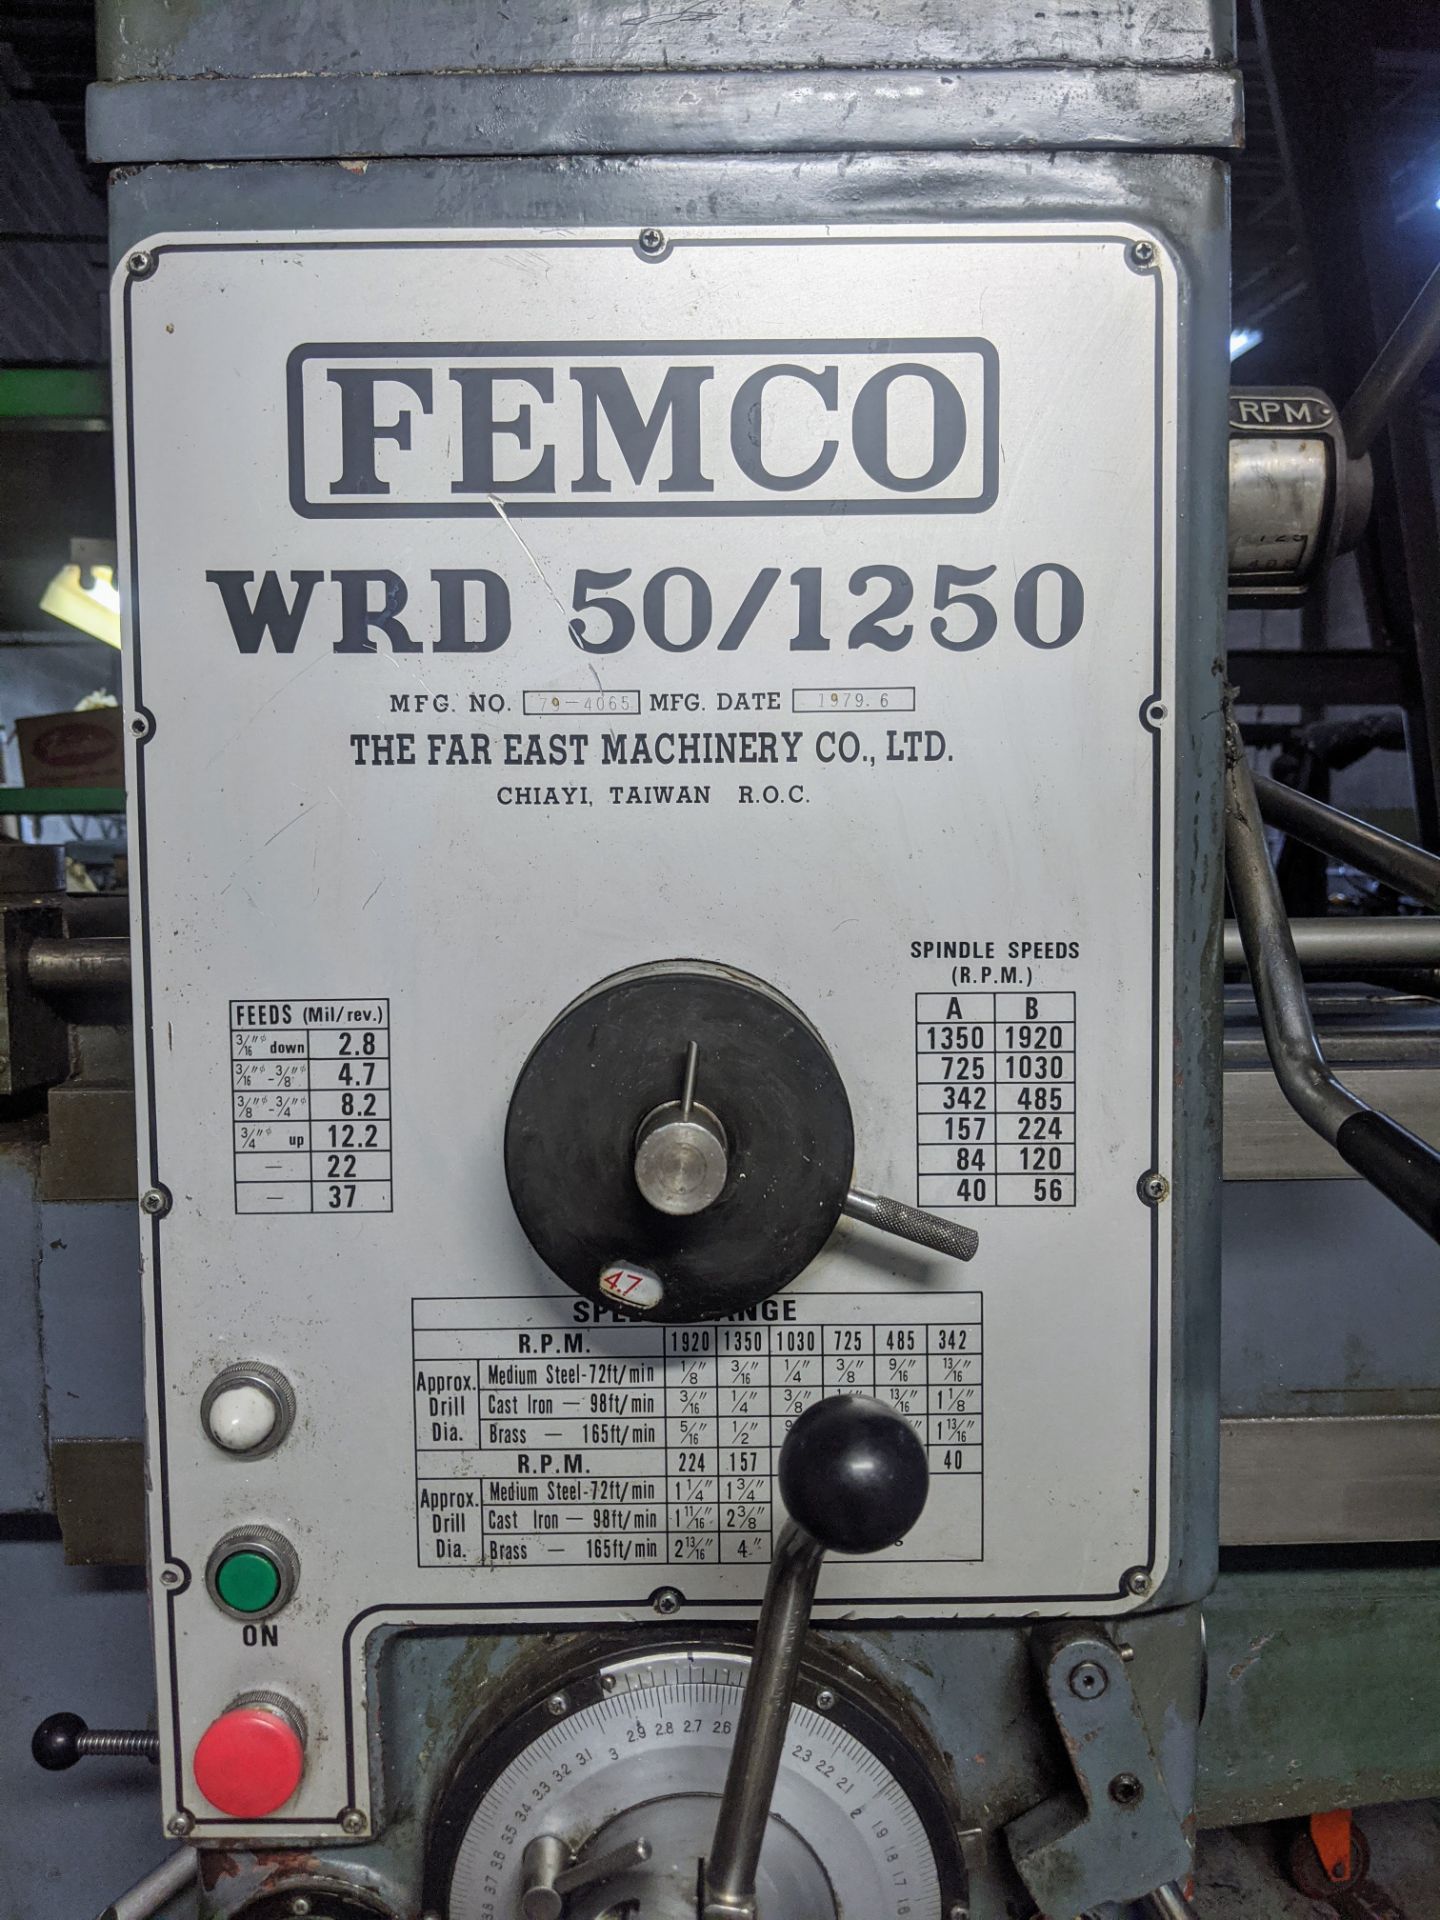 FEMCO WRD 50/1250 Radial Arm Drill, 4’ Arm, 1,920 RPM, s/n 79-4065 - Image 4 of 6